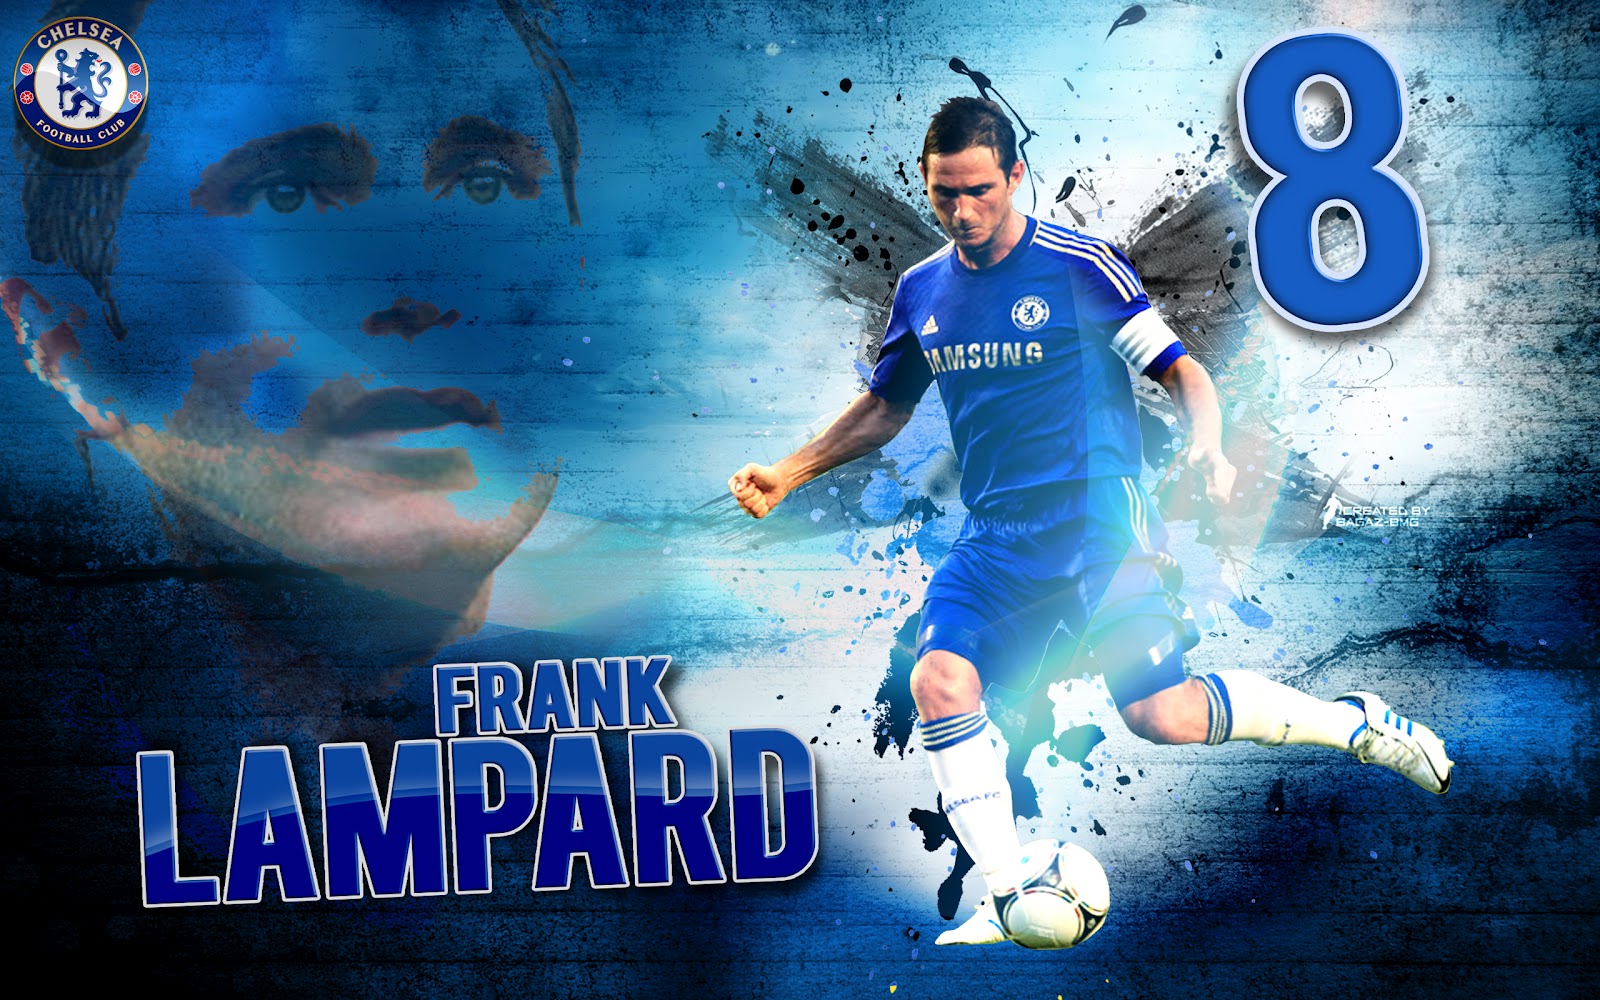 All HD Wallpapers: Frank Lampard New HD Wallpapers 2012-2013